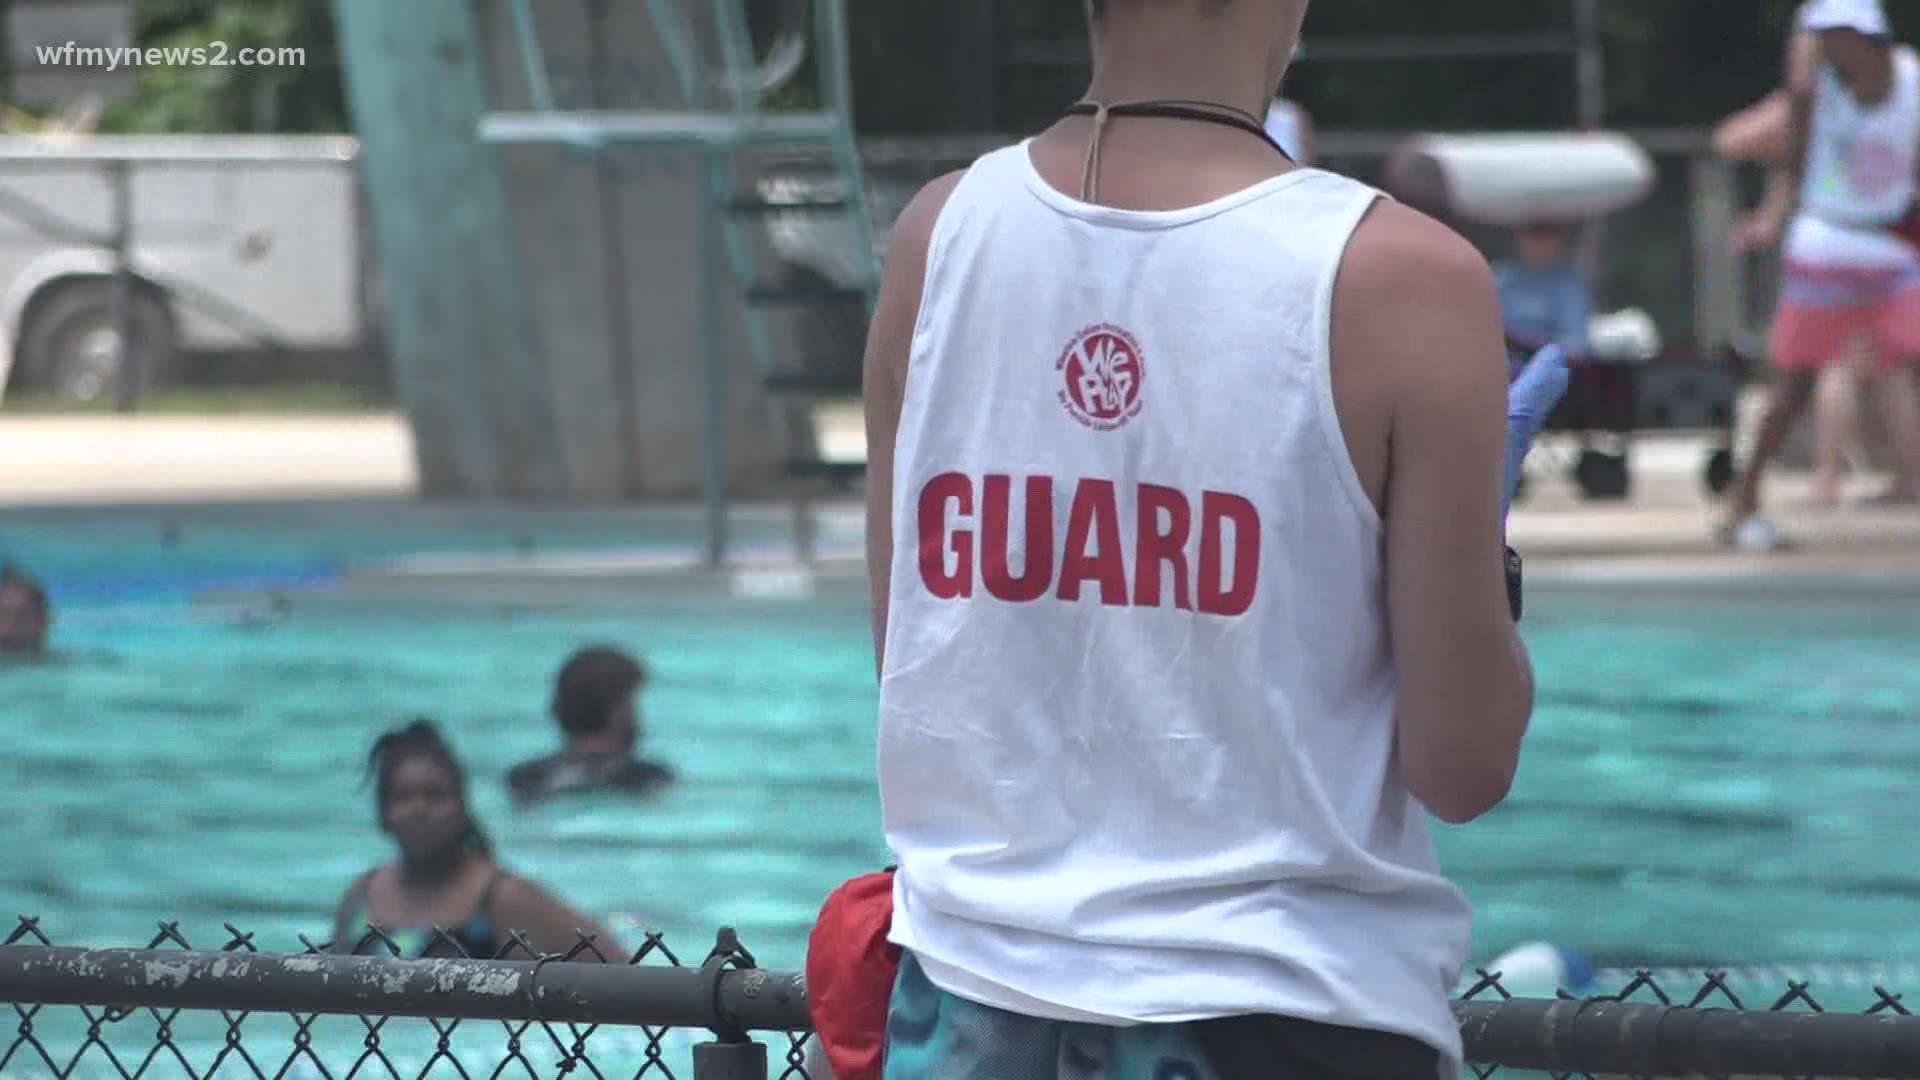 Pools across the Triad are opening for the summer season. Lifeguards at some of those locations discuss how their jobs have changed.